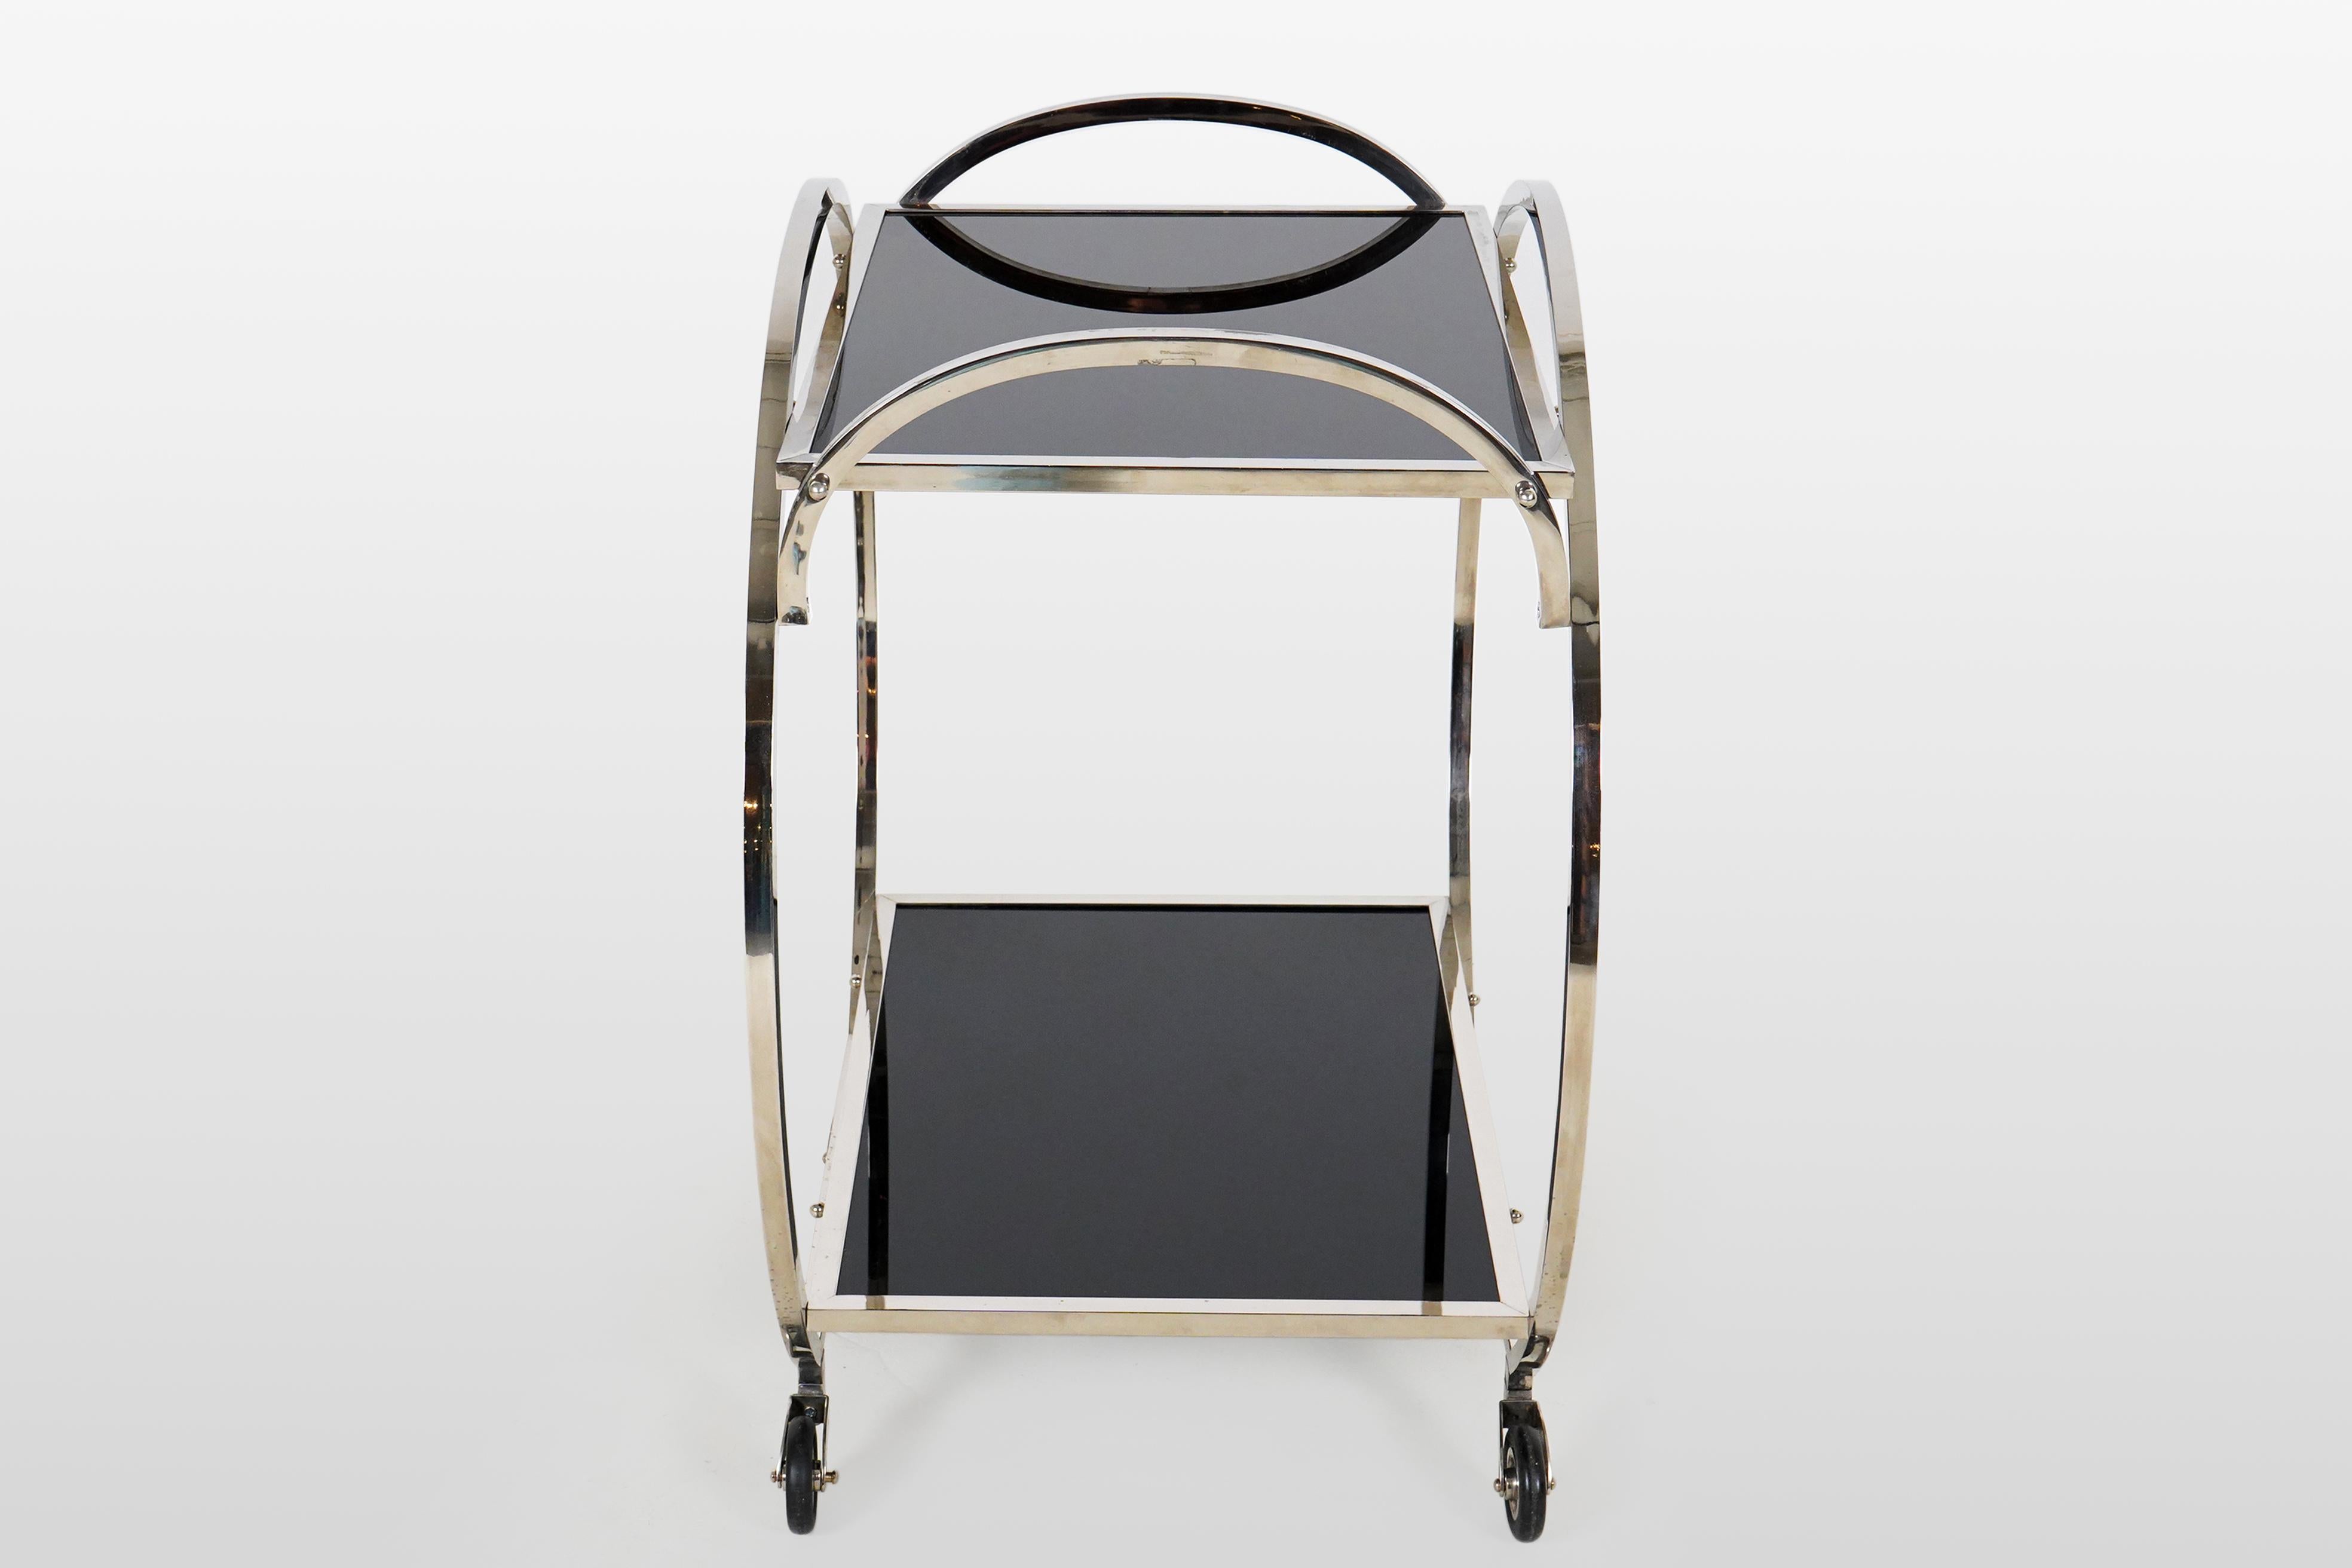 Bauhaus-Inspired Bar Cart with Chrome Frame and Glass Shelves In Good Condition For Sale In Chicago, IL